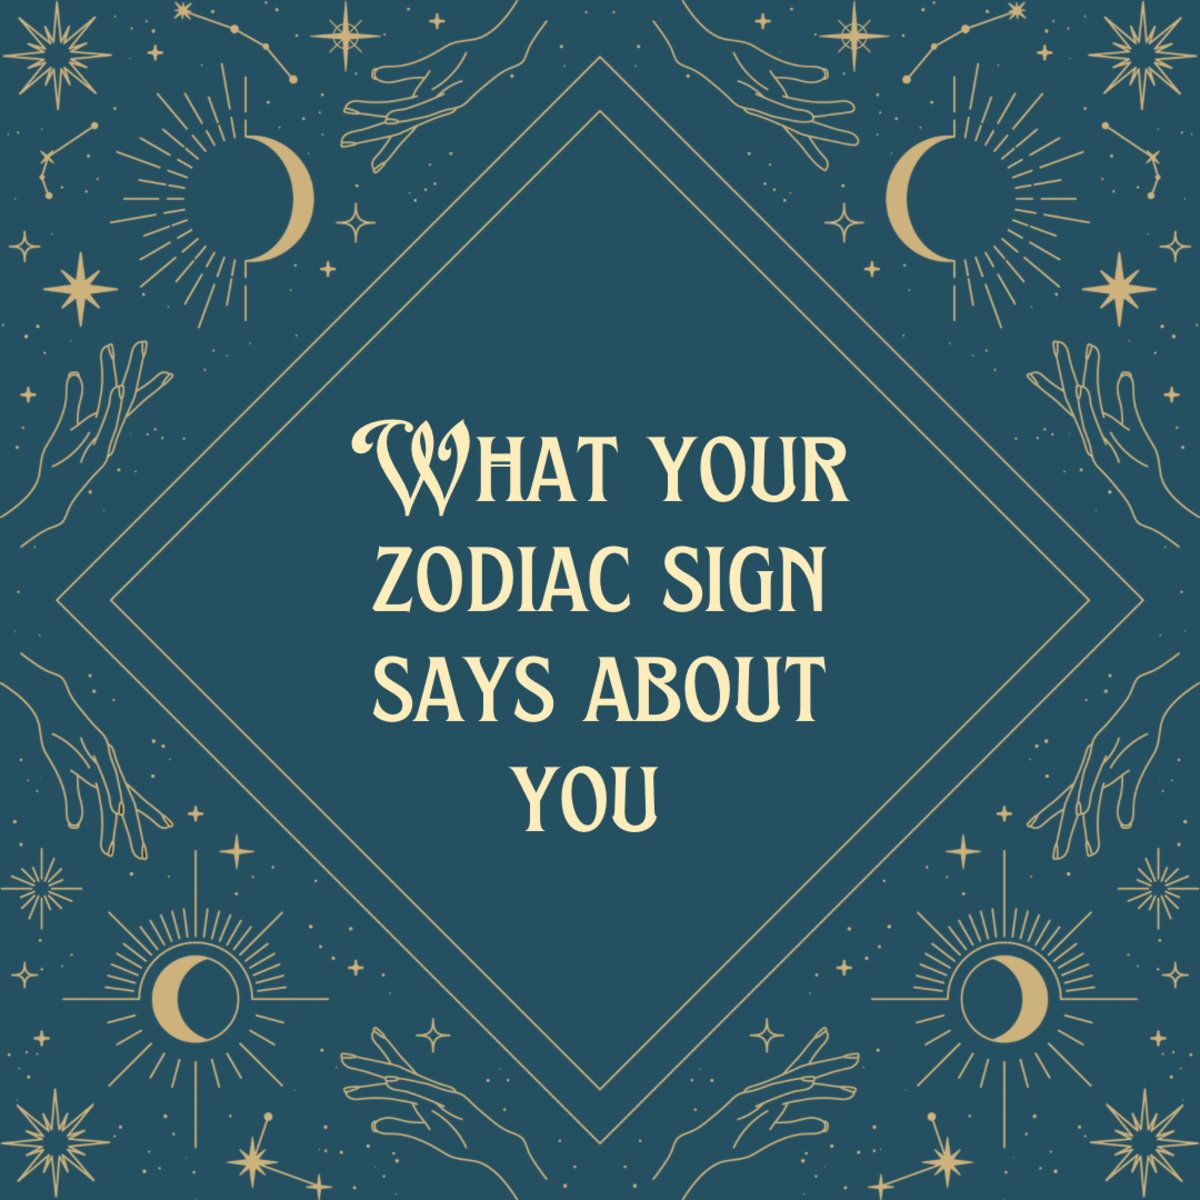 What Your Zodiac Sign Says About You